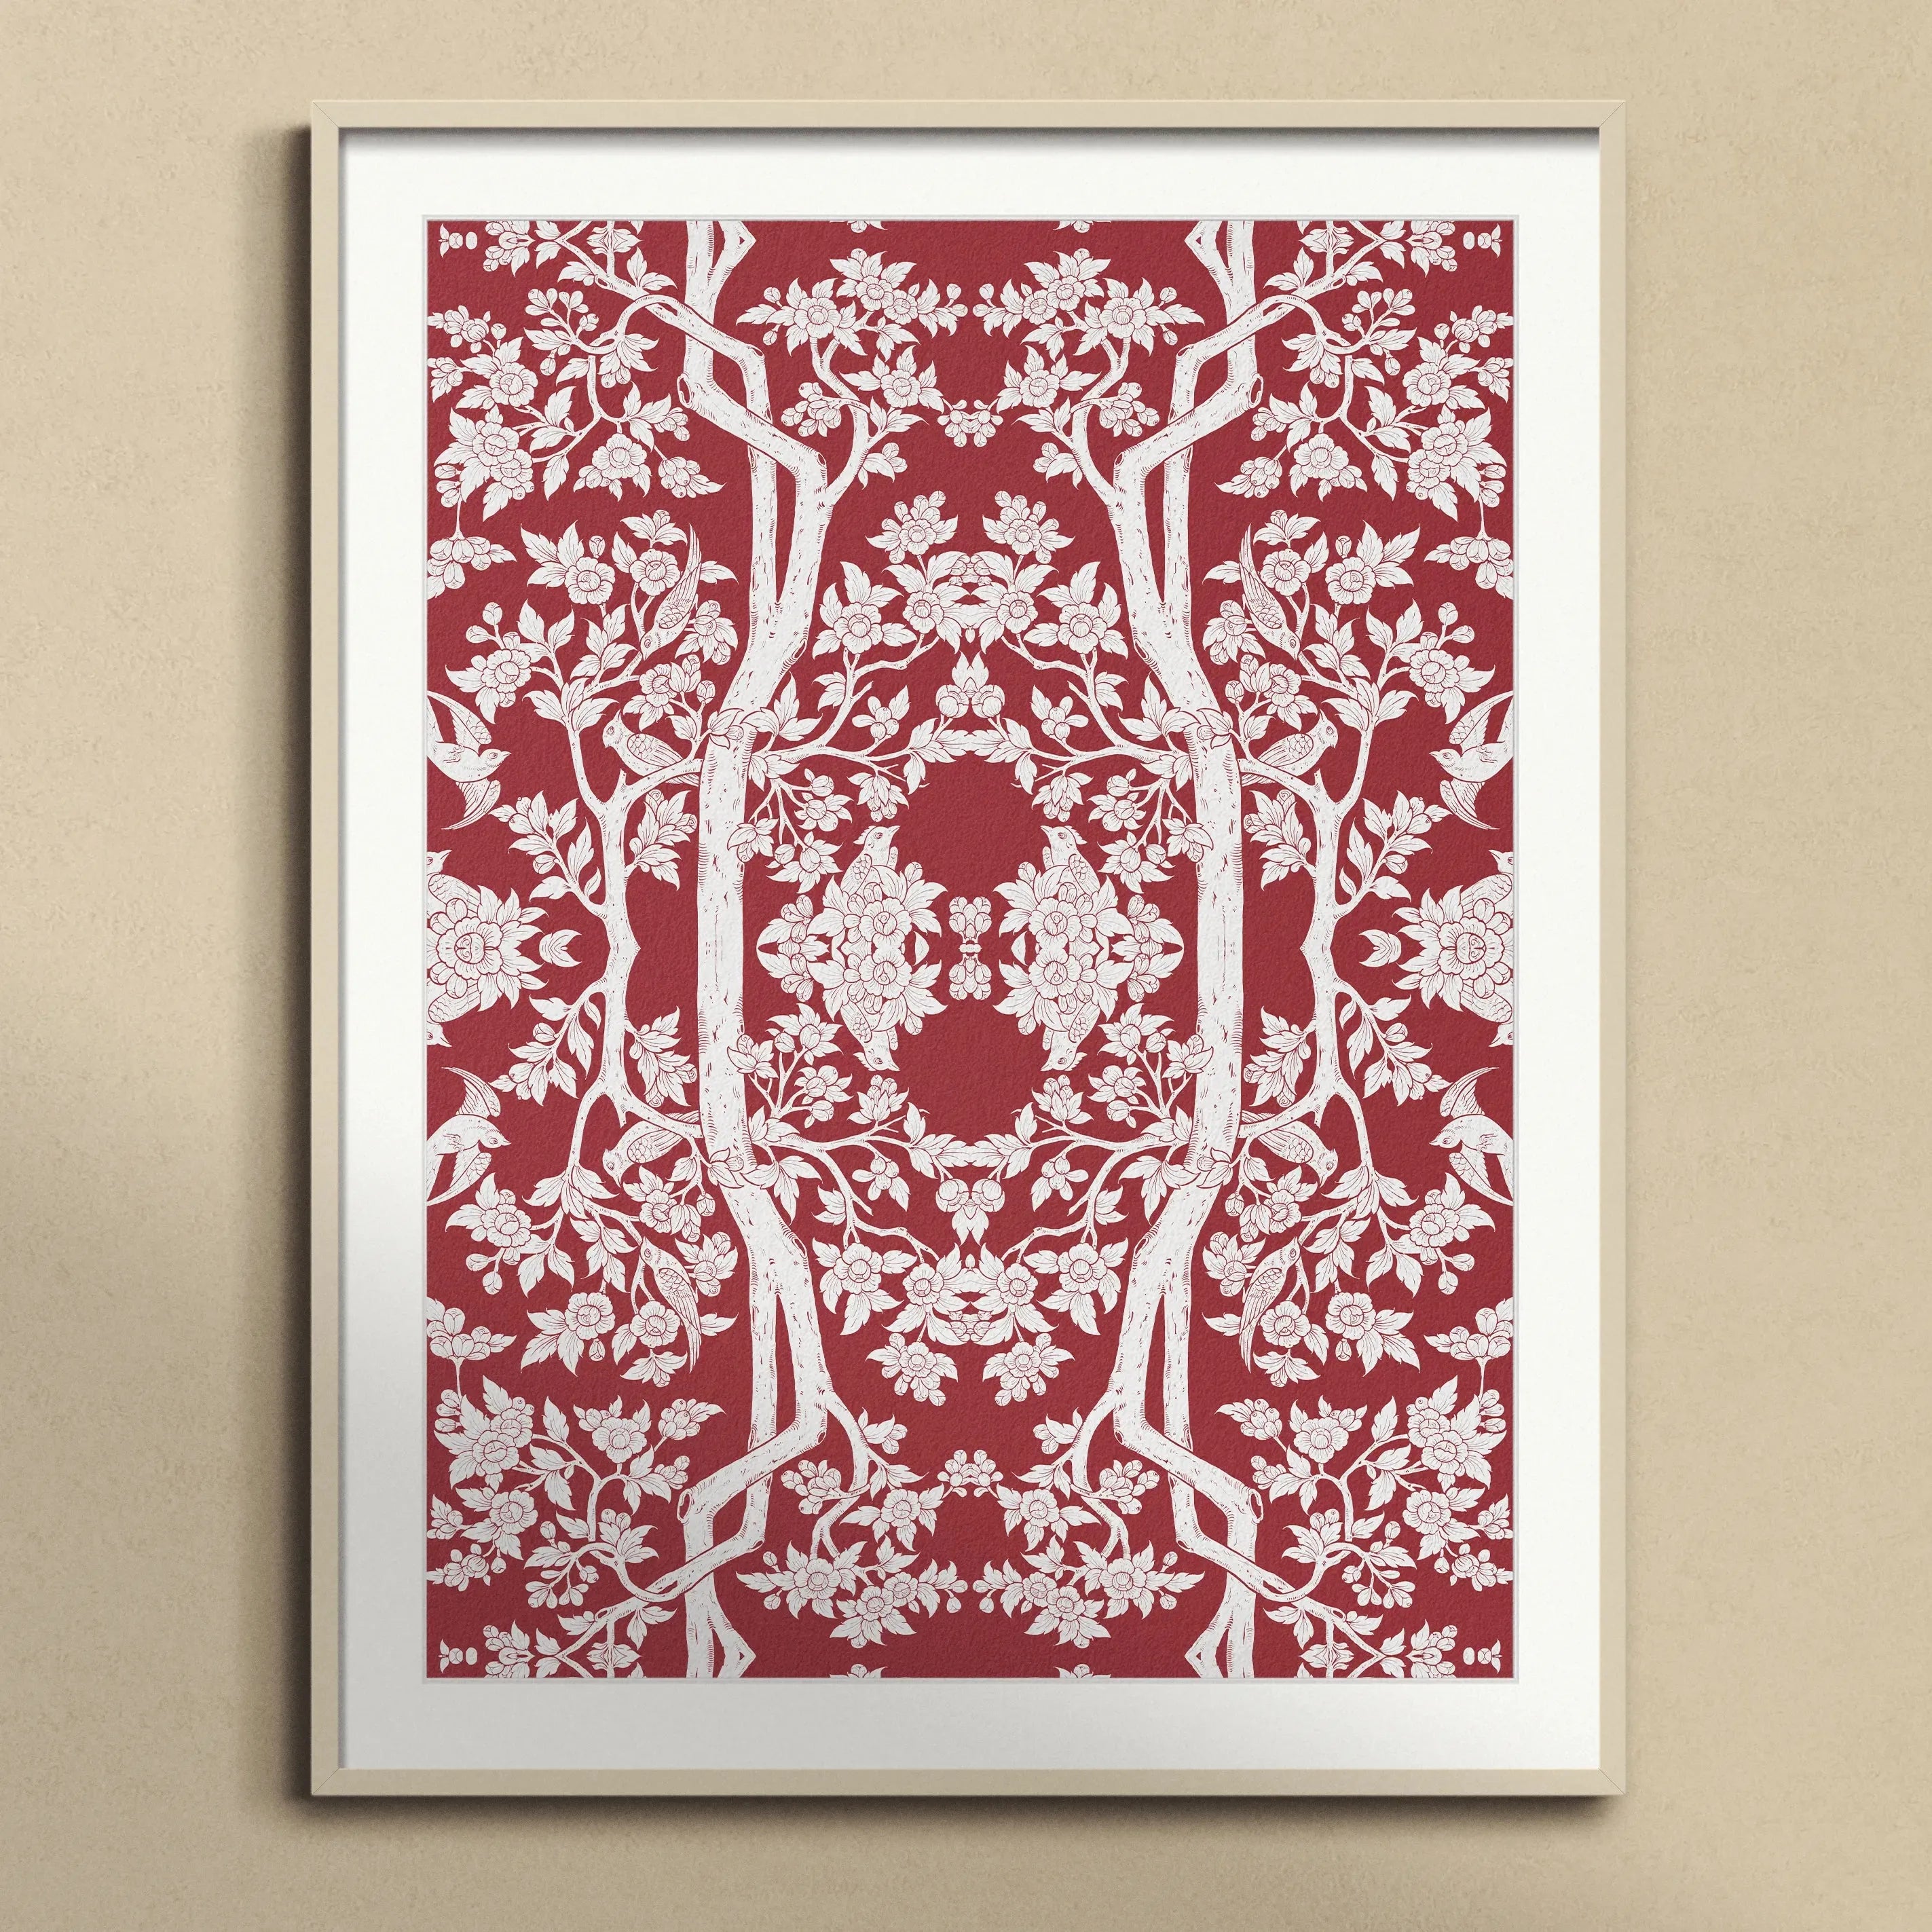 Aviary Red Framed & Mounted Print - Posters Prints & Visual Artwork - Aesthetic Art